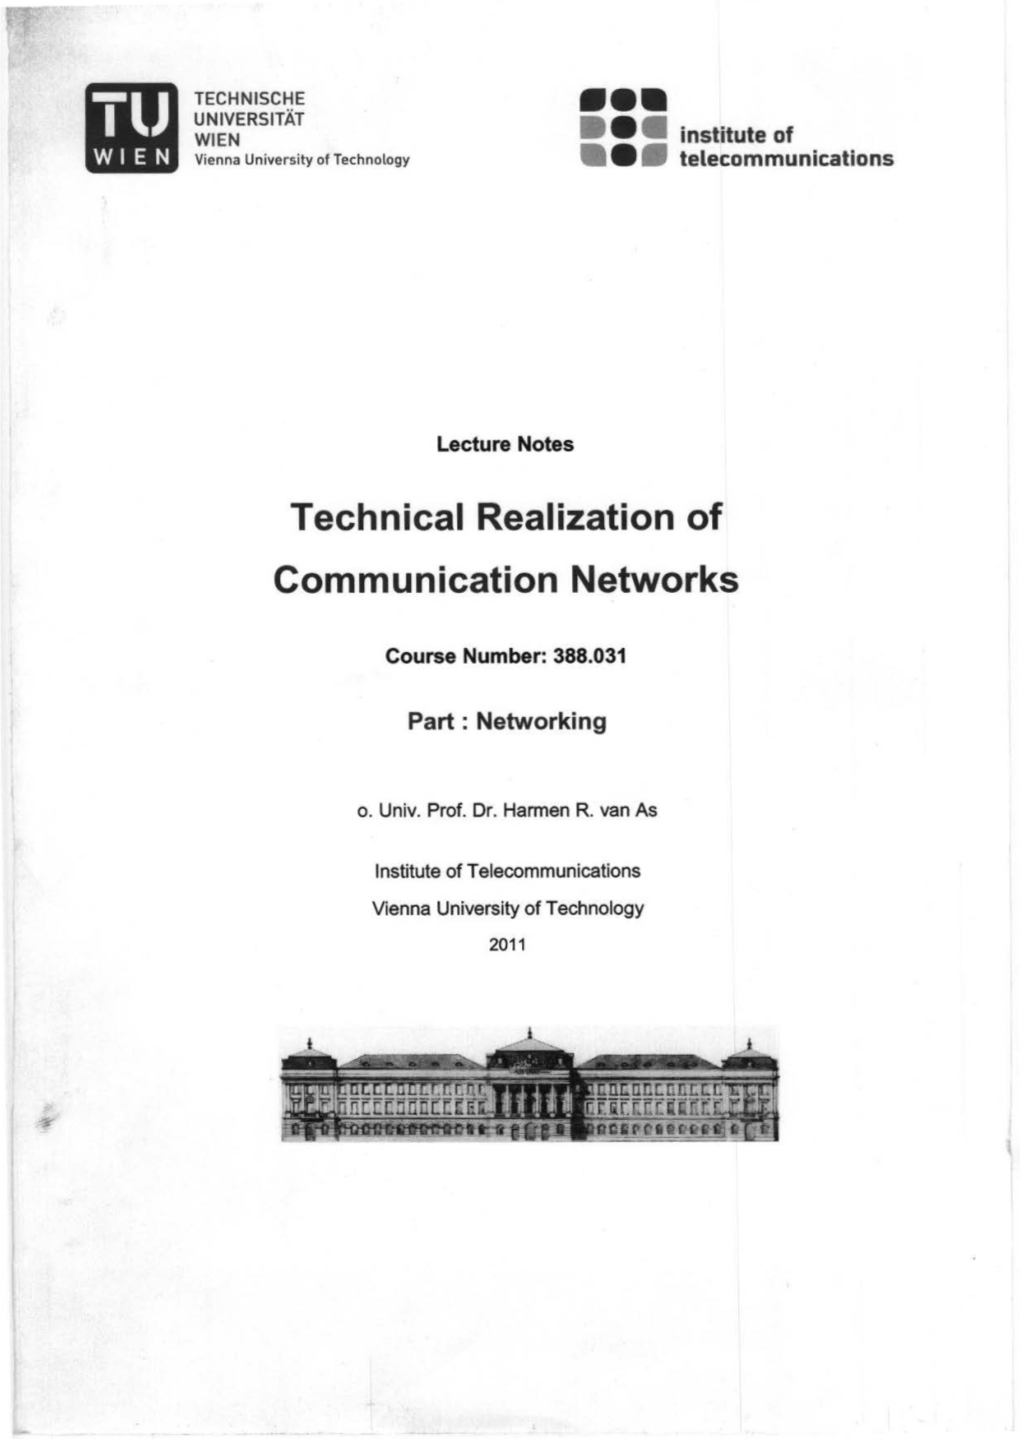 Technical Realization of Communication Networks